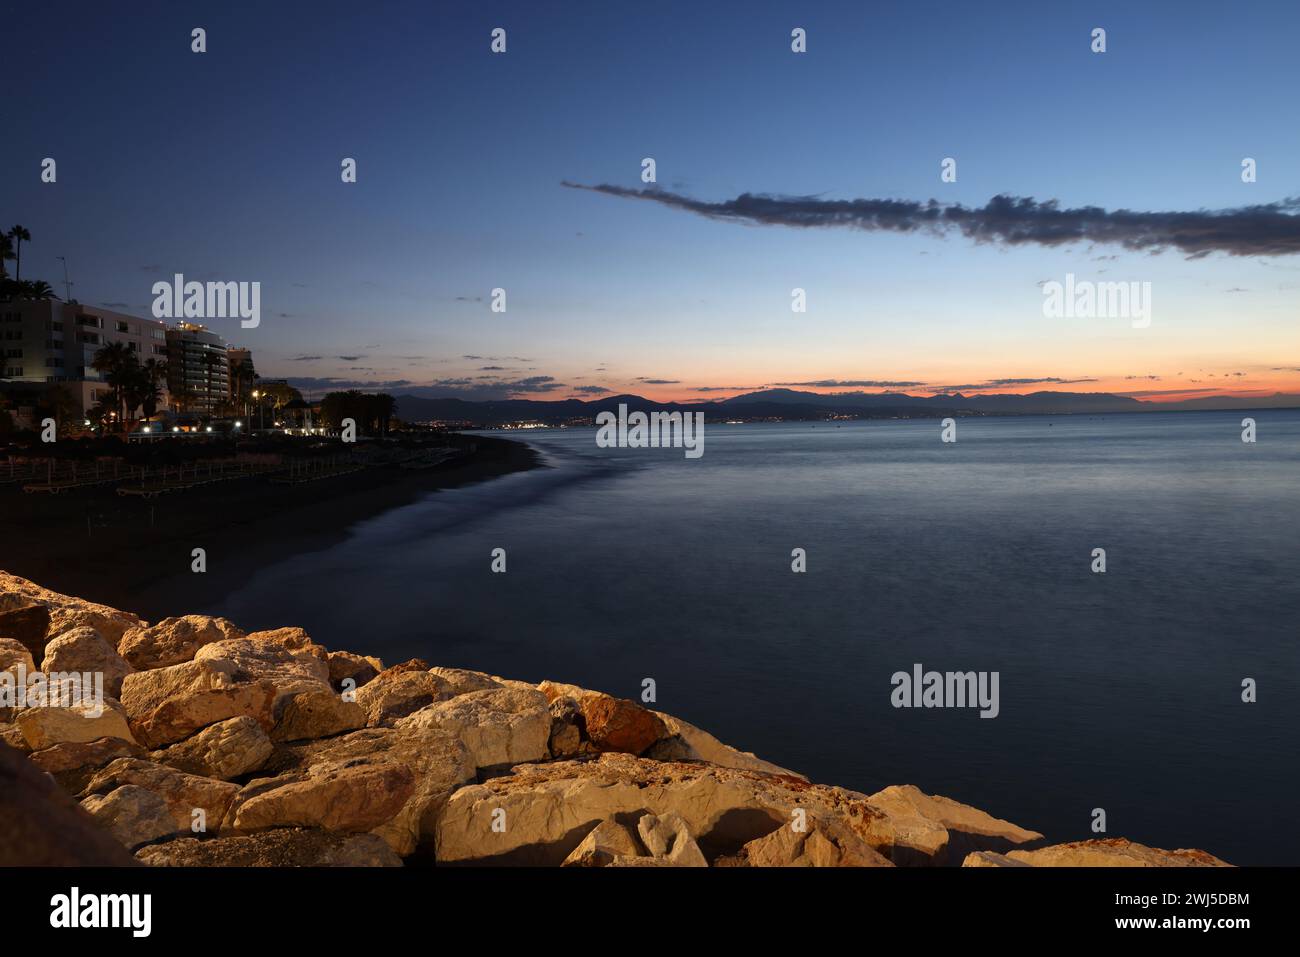 View from Torremolinos towards Malaga just before sunrise. Costa del Sol, Spain. Stock Photo